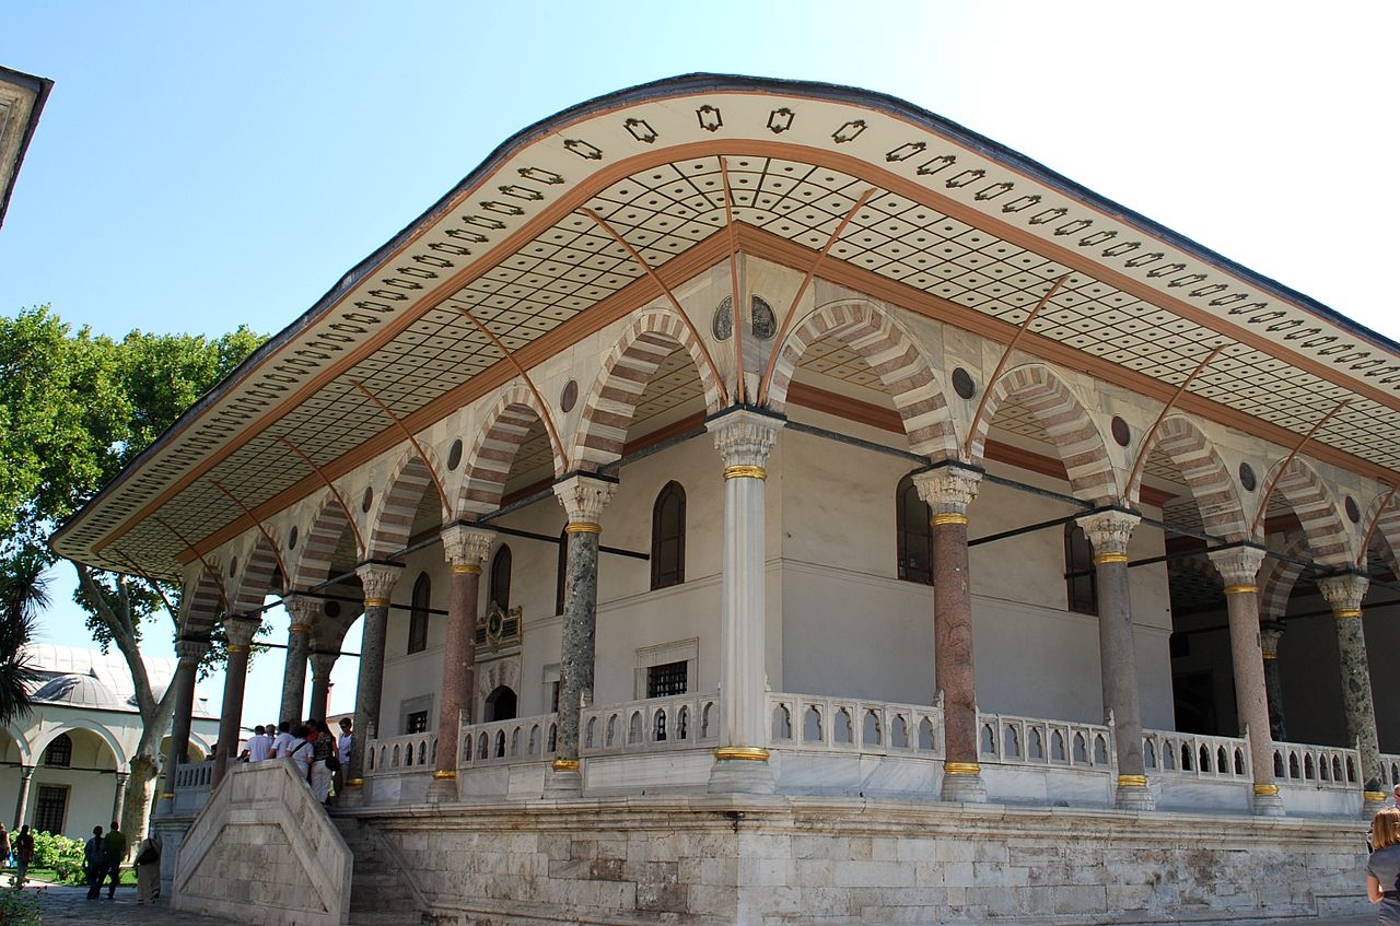 Topkapi Palace in Istanbul: excursions and tickets